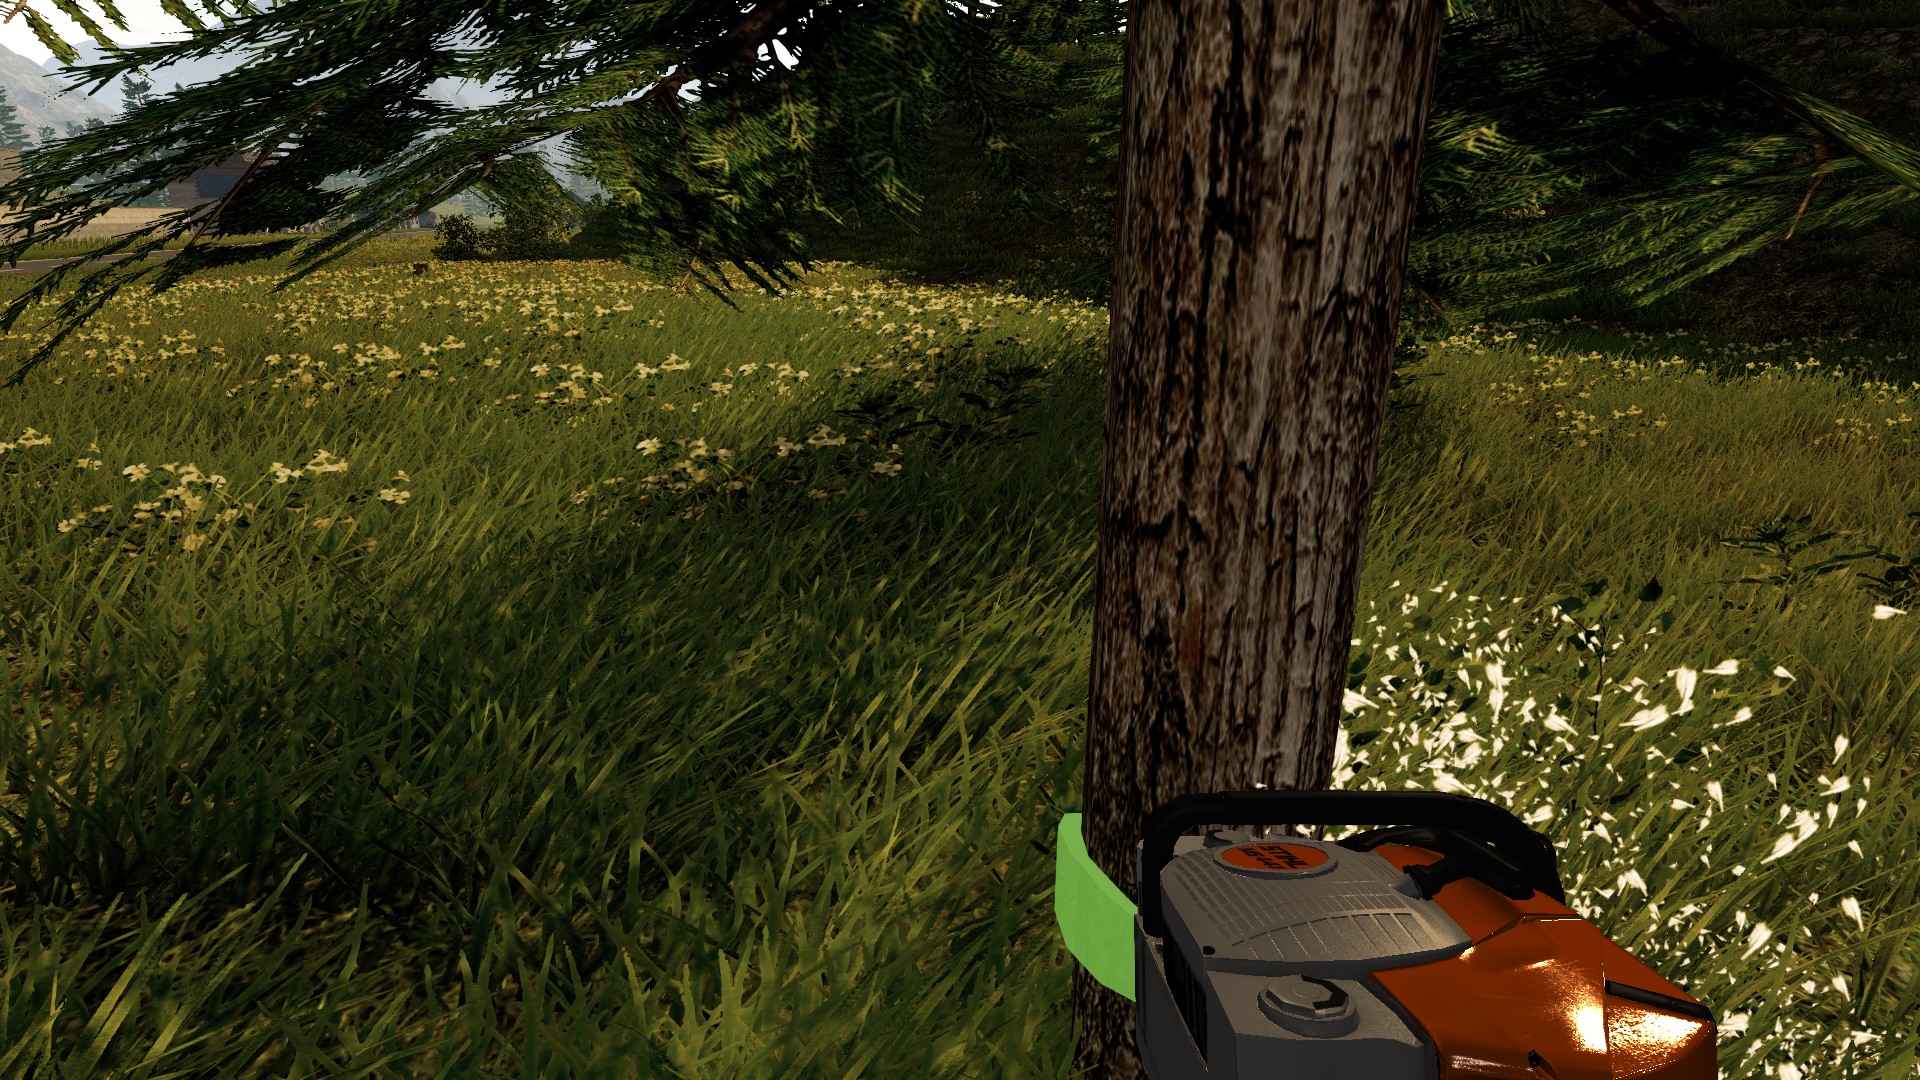 Forestry 2017: The Simulation - screenshot 1